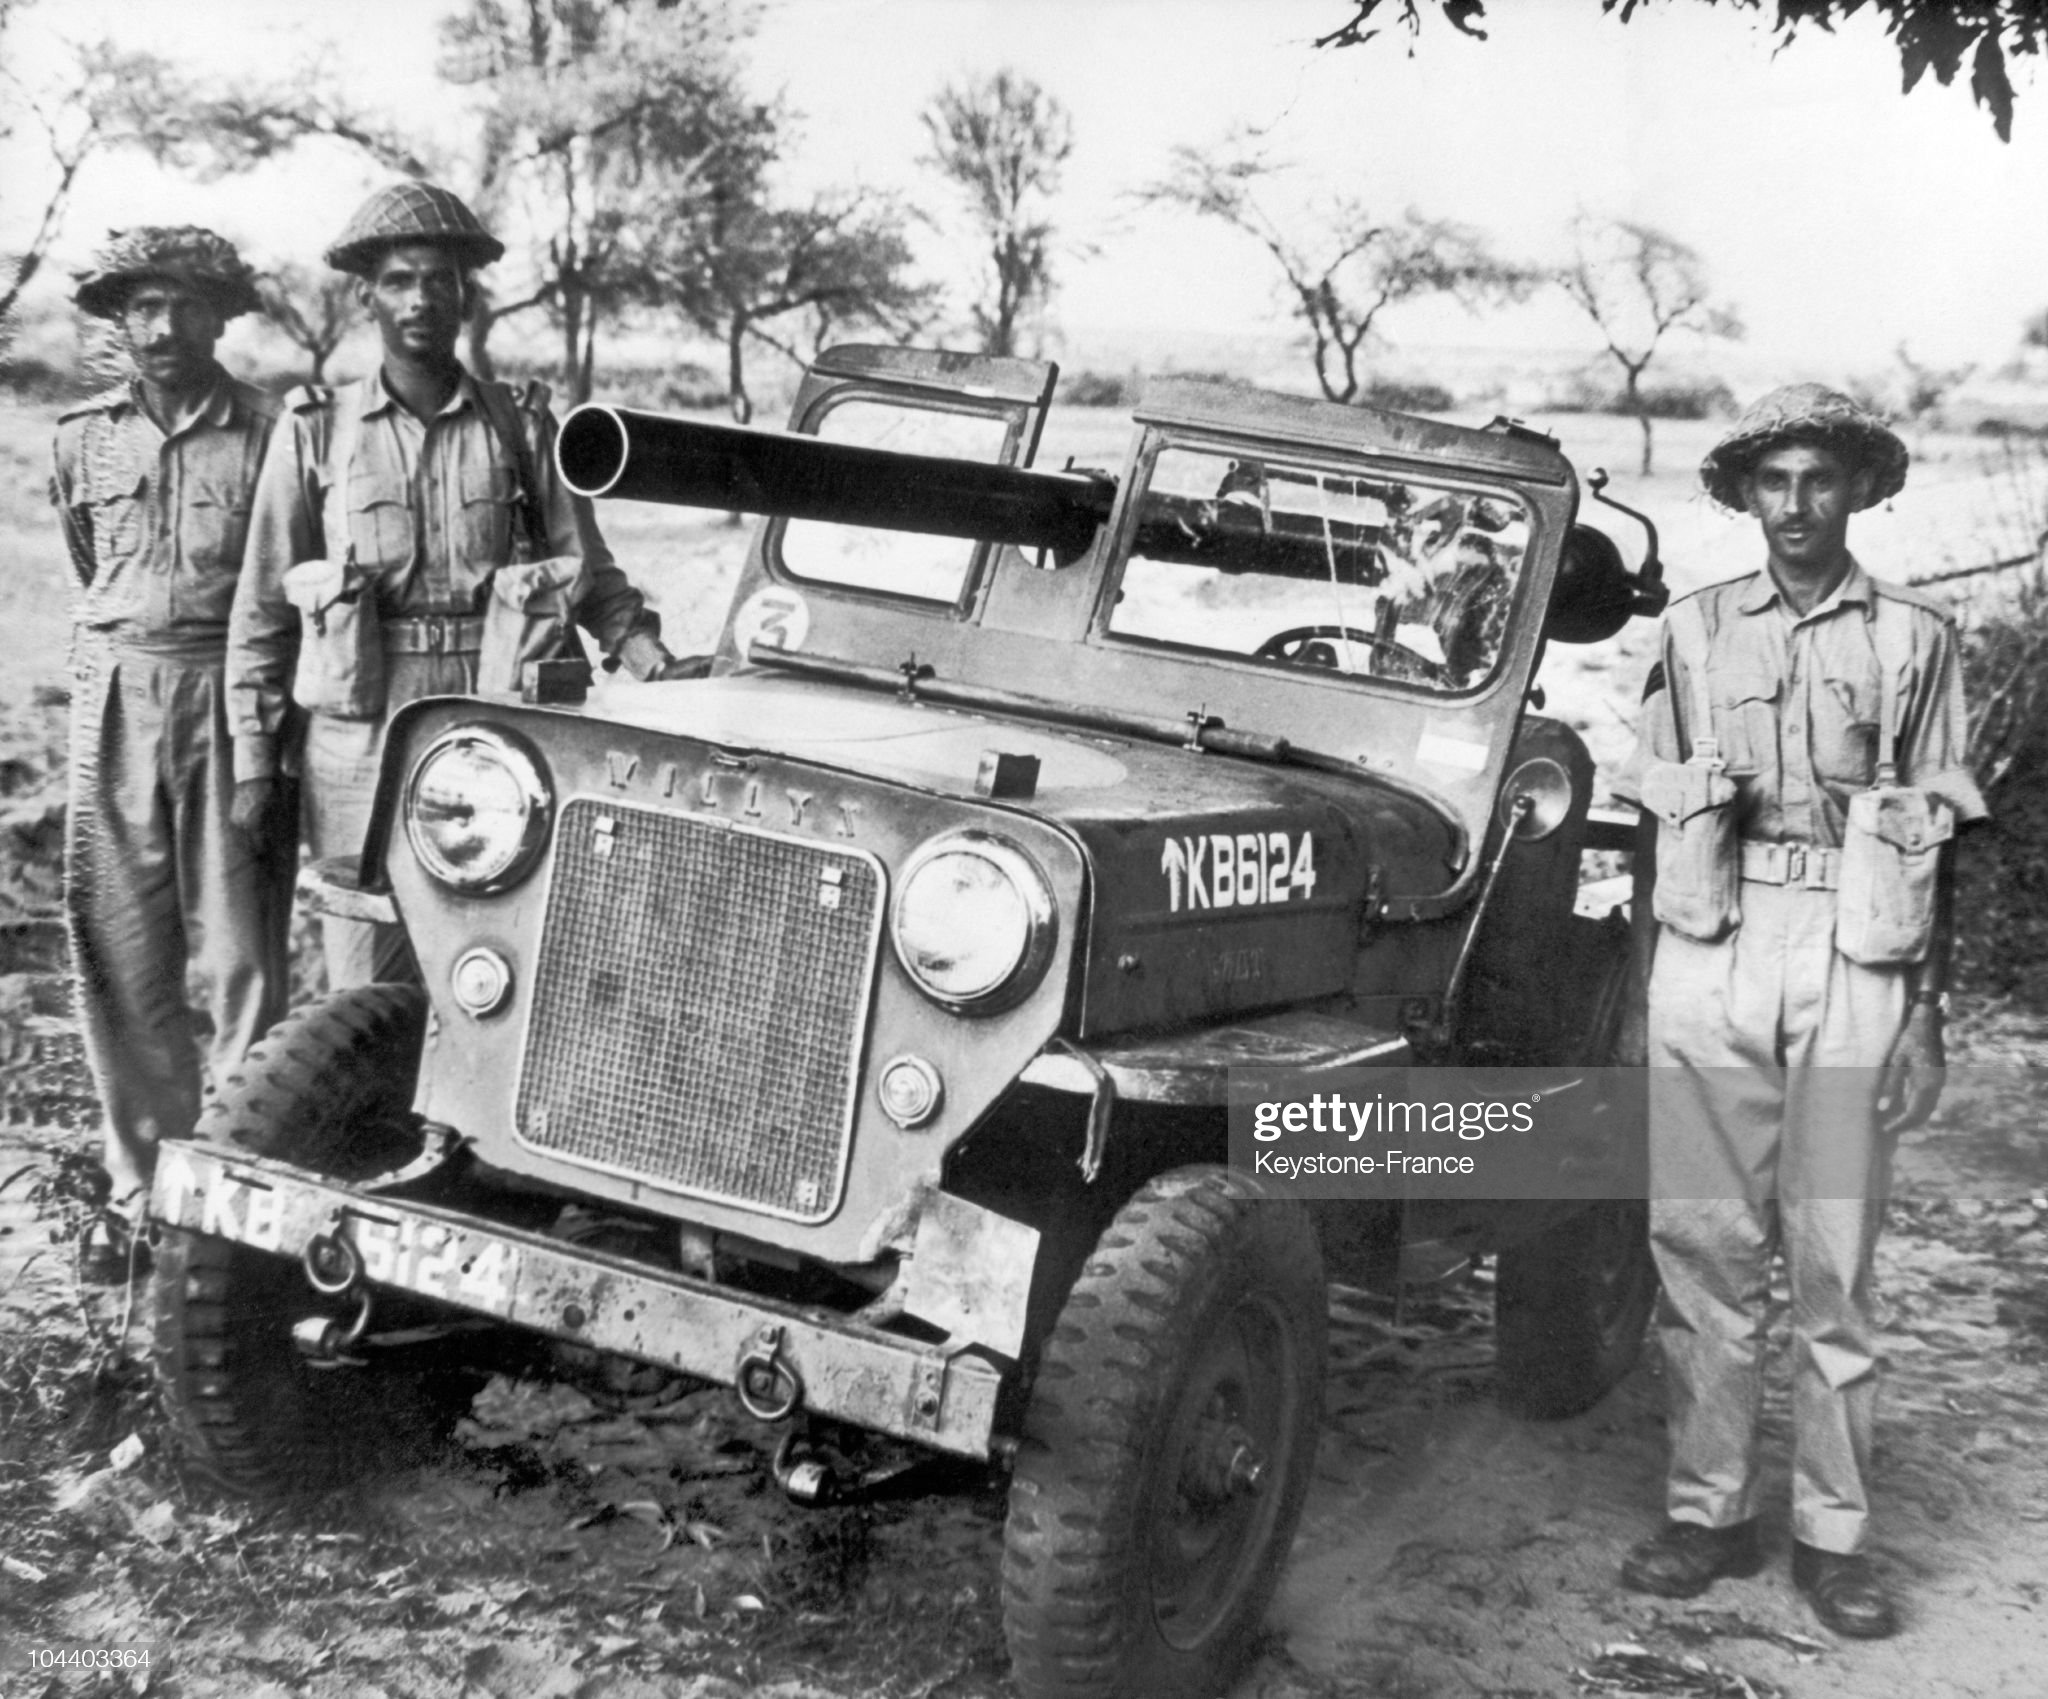 Three Pakistani soldiers surrounded a Willis Jeep equipped with a canon and abandoned by Indian soldiers.